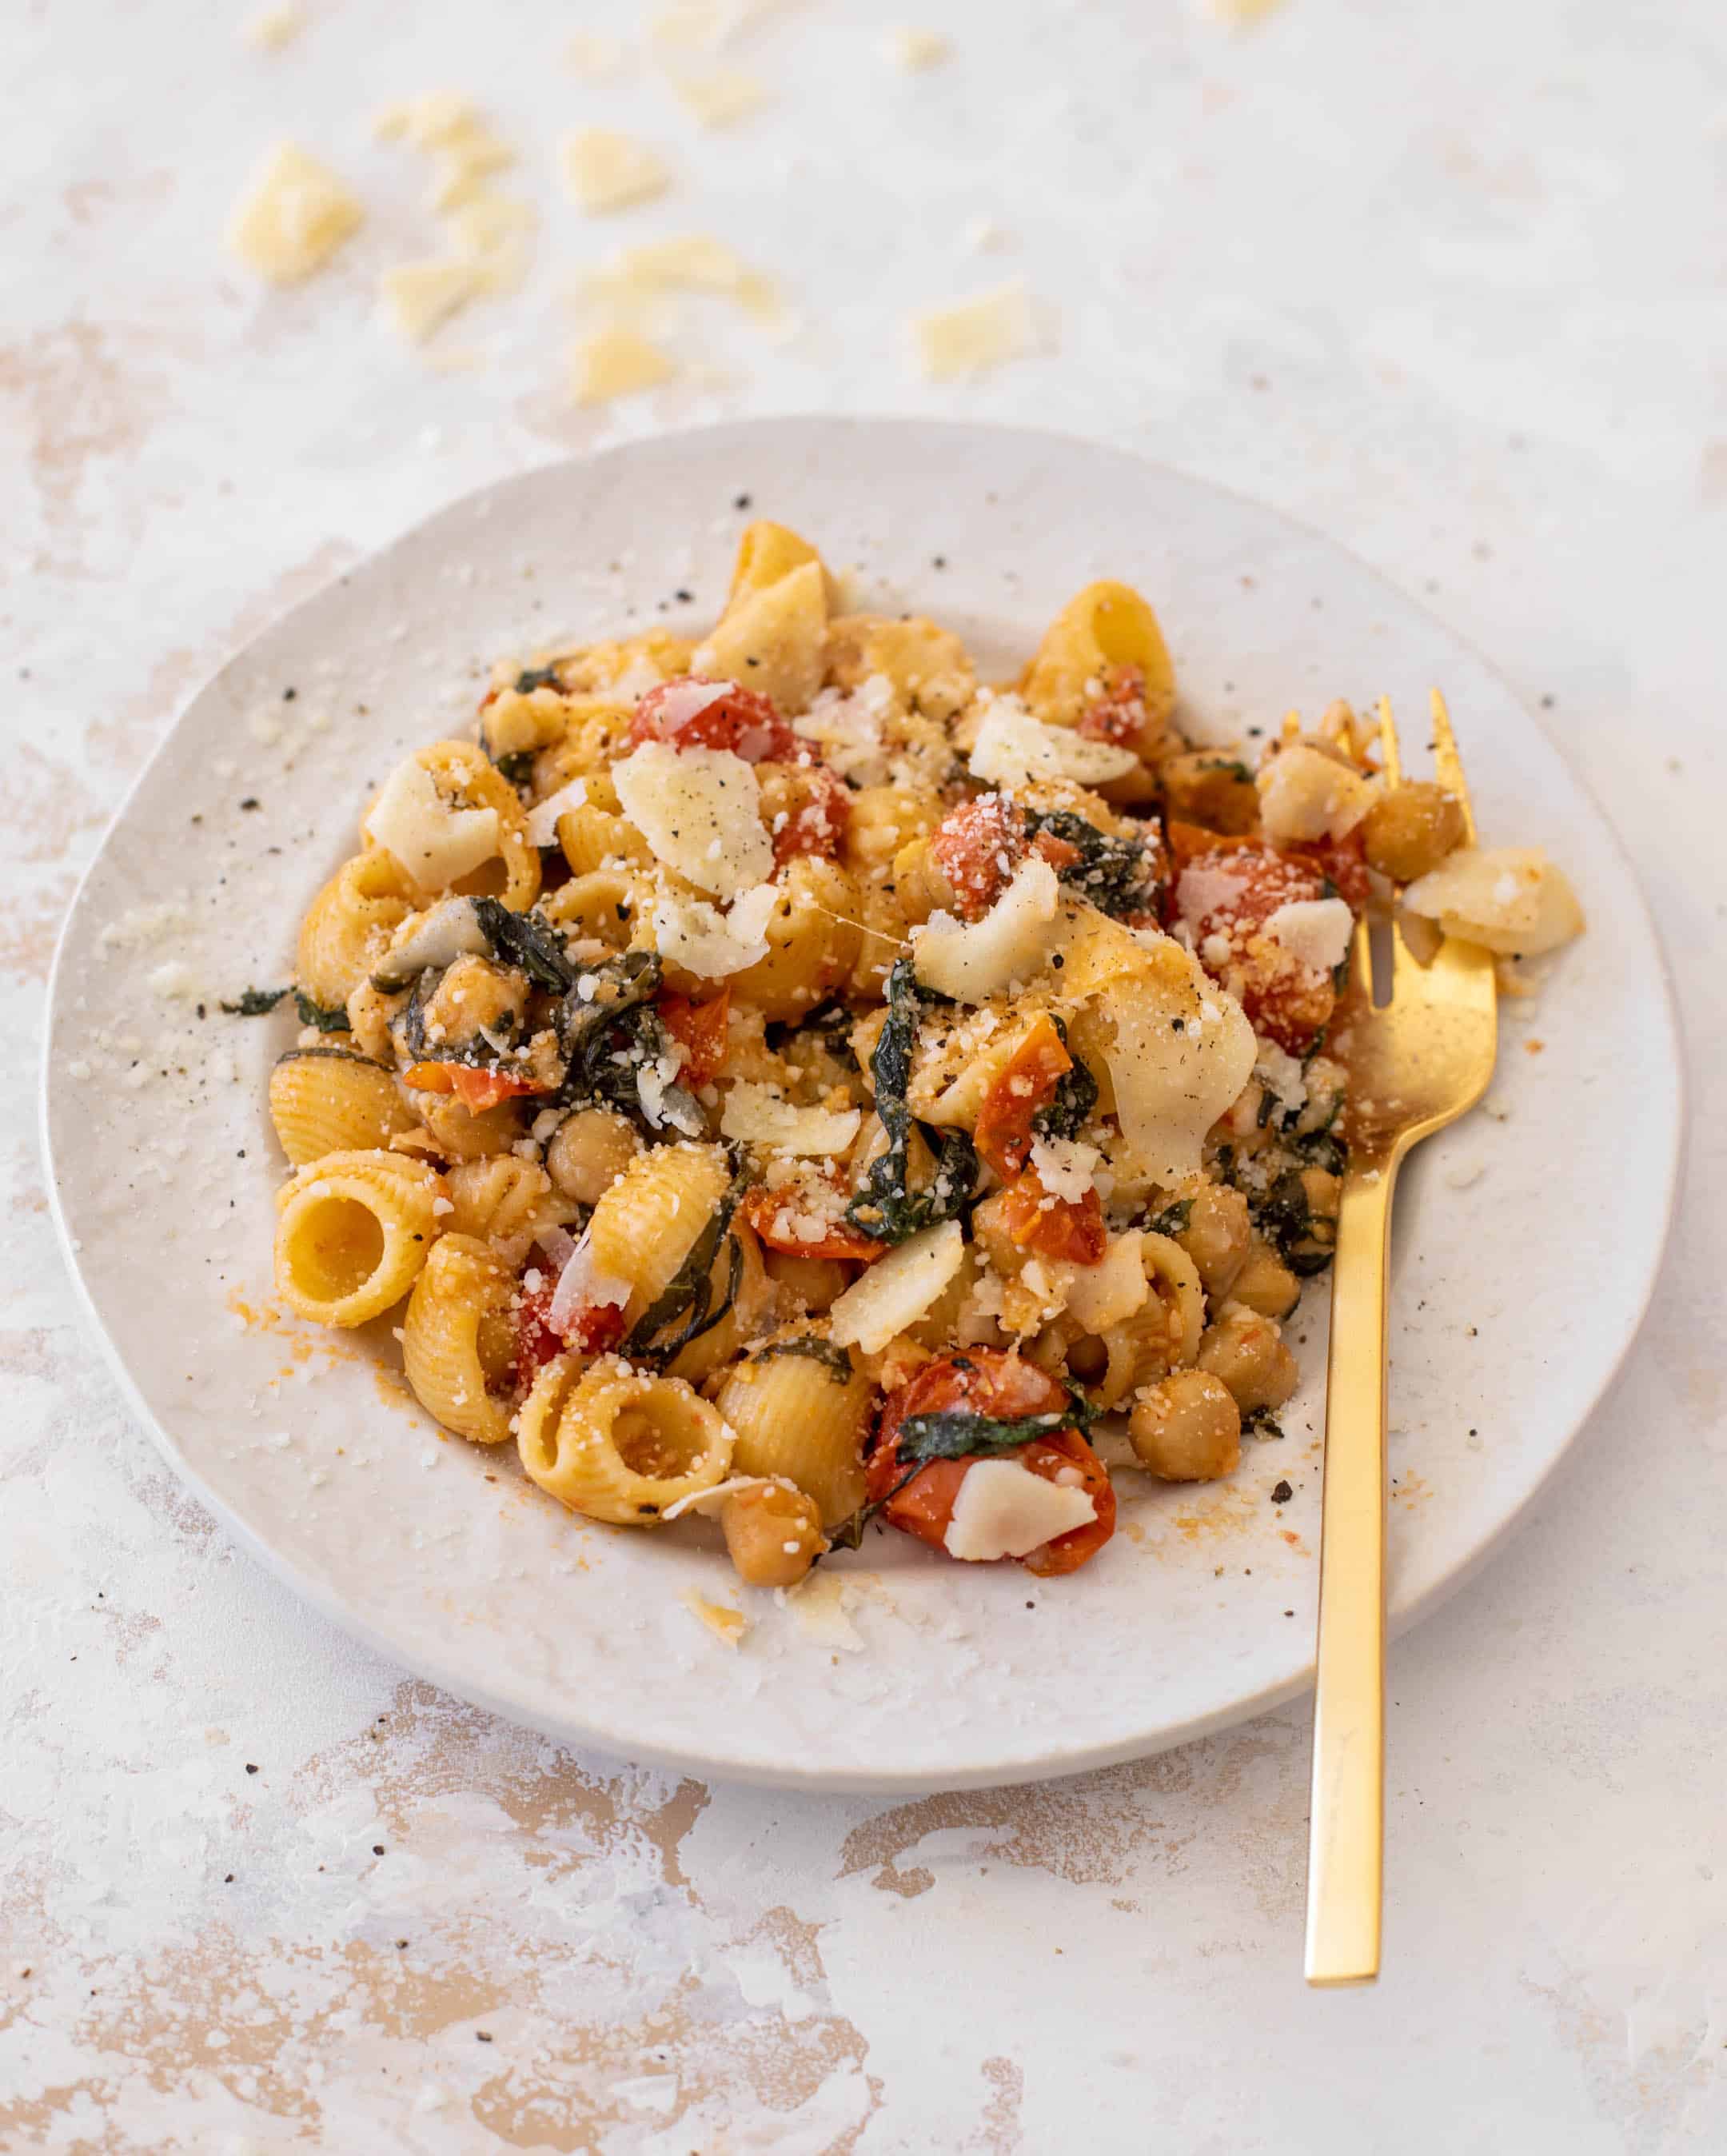 burst tomato pasta with chickpeas and spinach